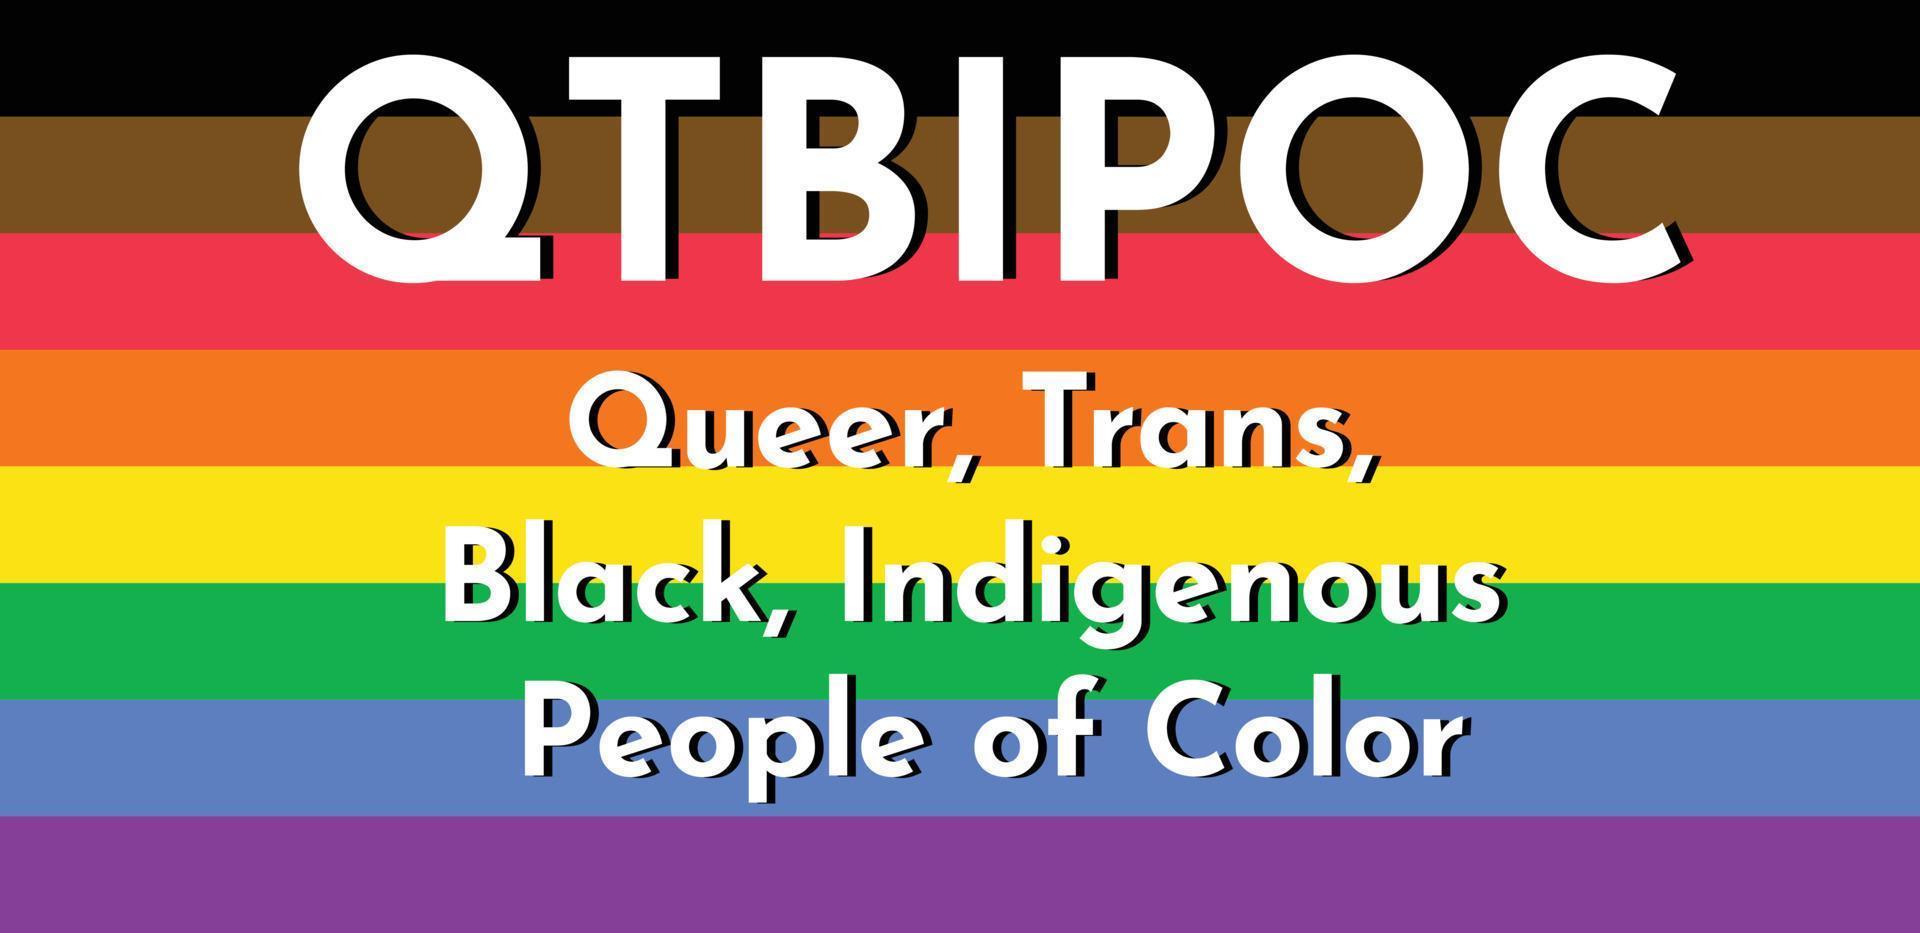 QTBPOC acronym - Queer Trans Black Indigineous People of Color. Extended LGBTQ flag with black, brown and rainbow stripes vector